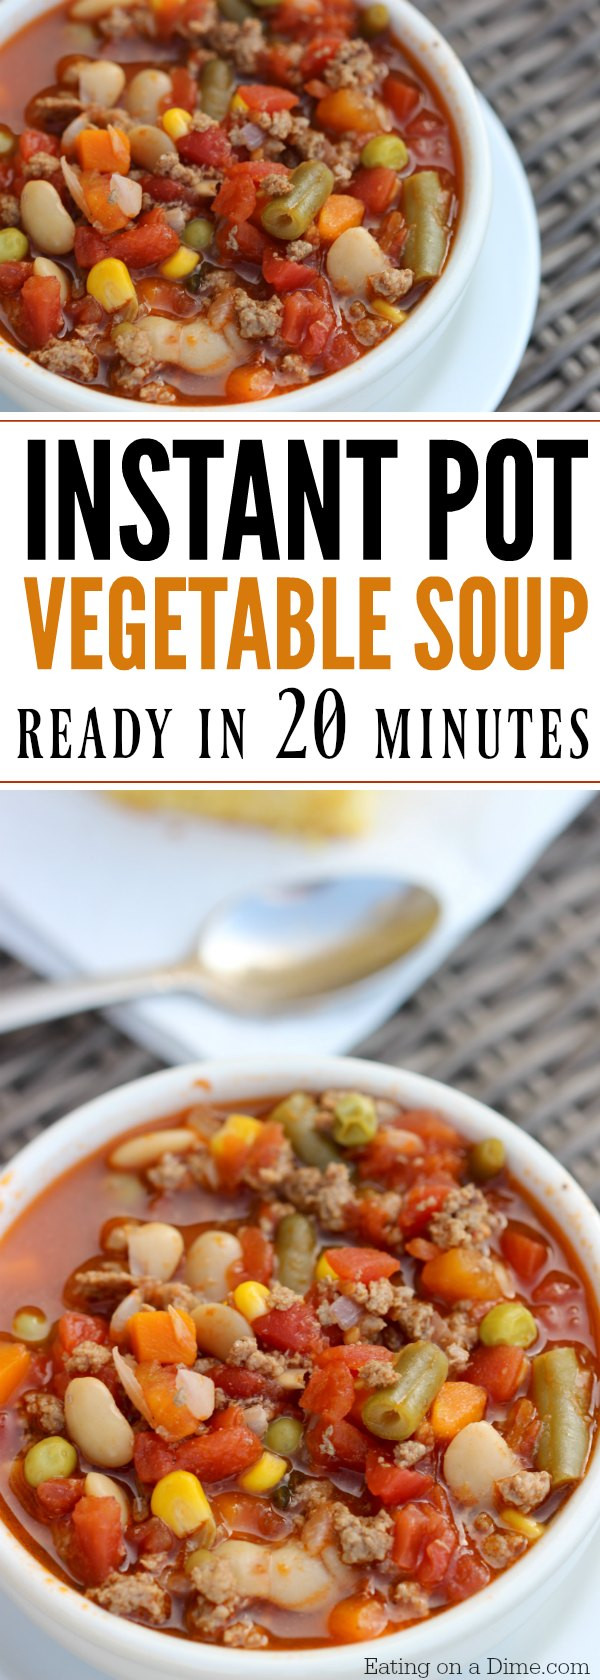 Beef Vegtable Soup
 Instant Pot Beef Ve able Soup Recipe Eating on a Dime